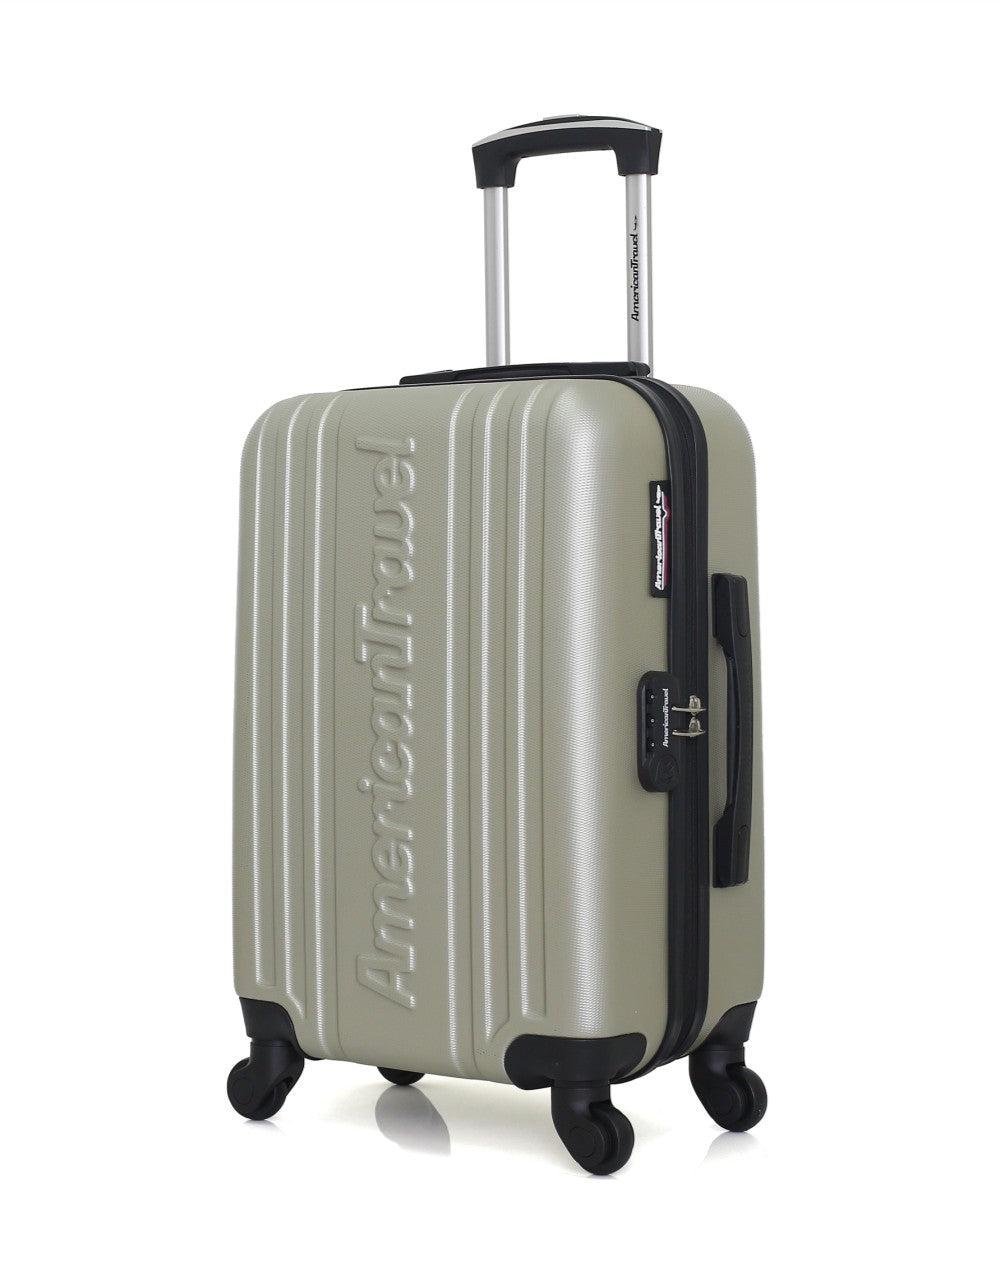 Valise Cabine ABS SPRINGFIELD 4 Roues 55 cm